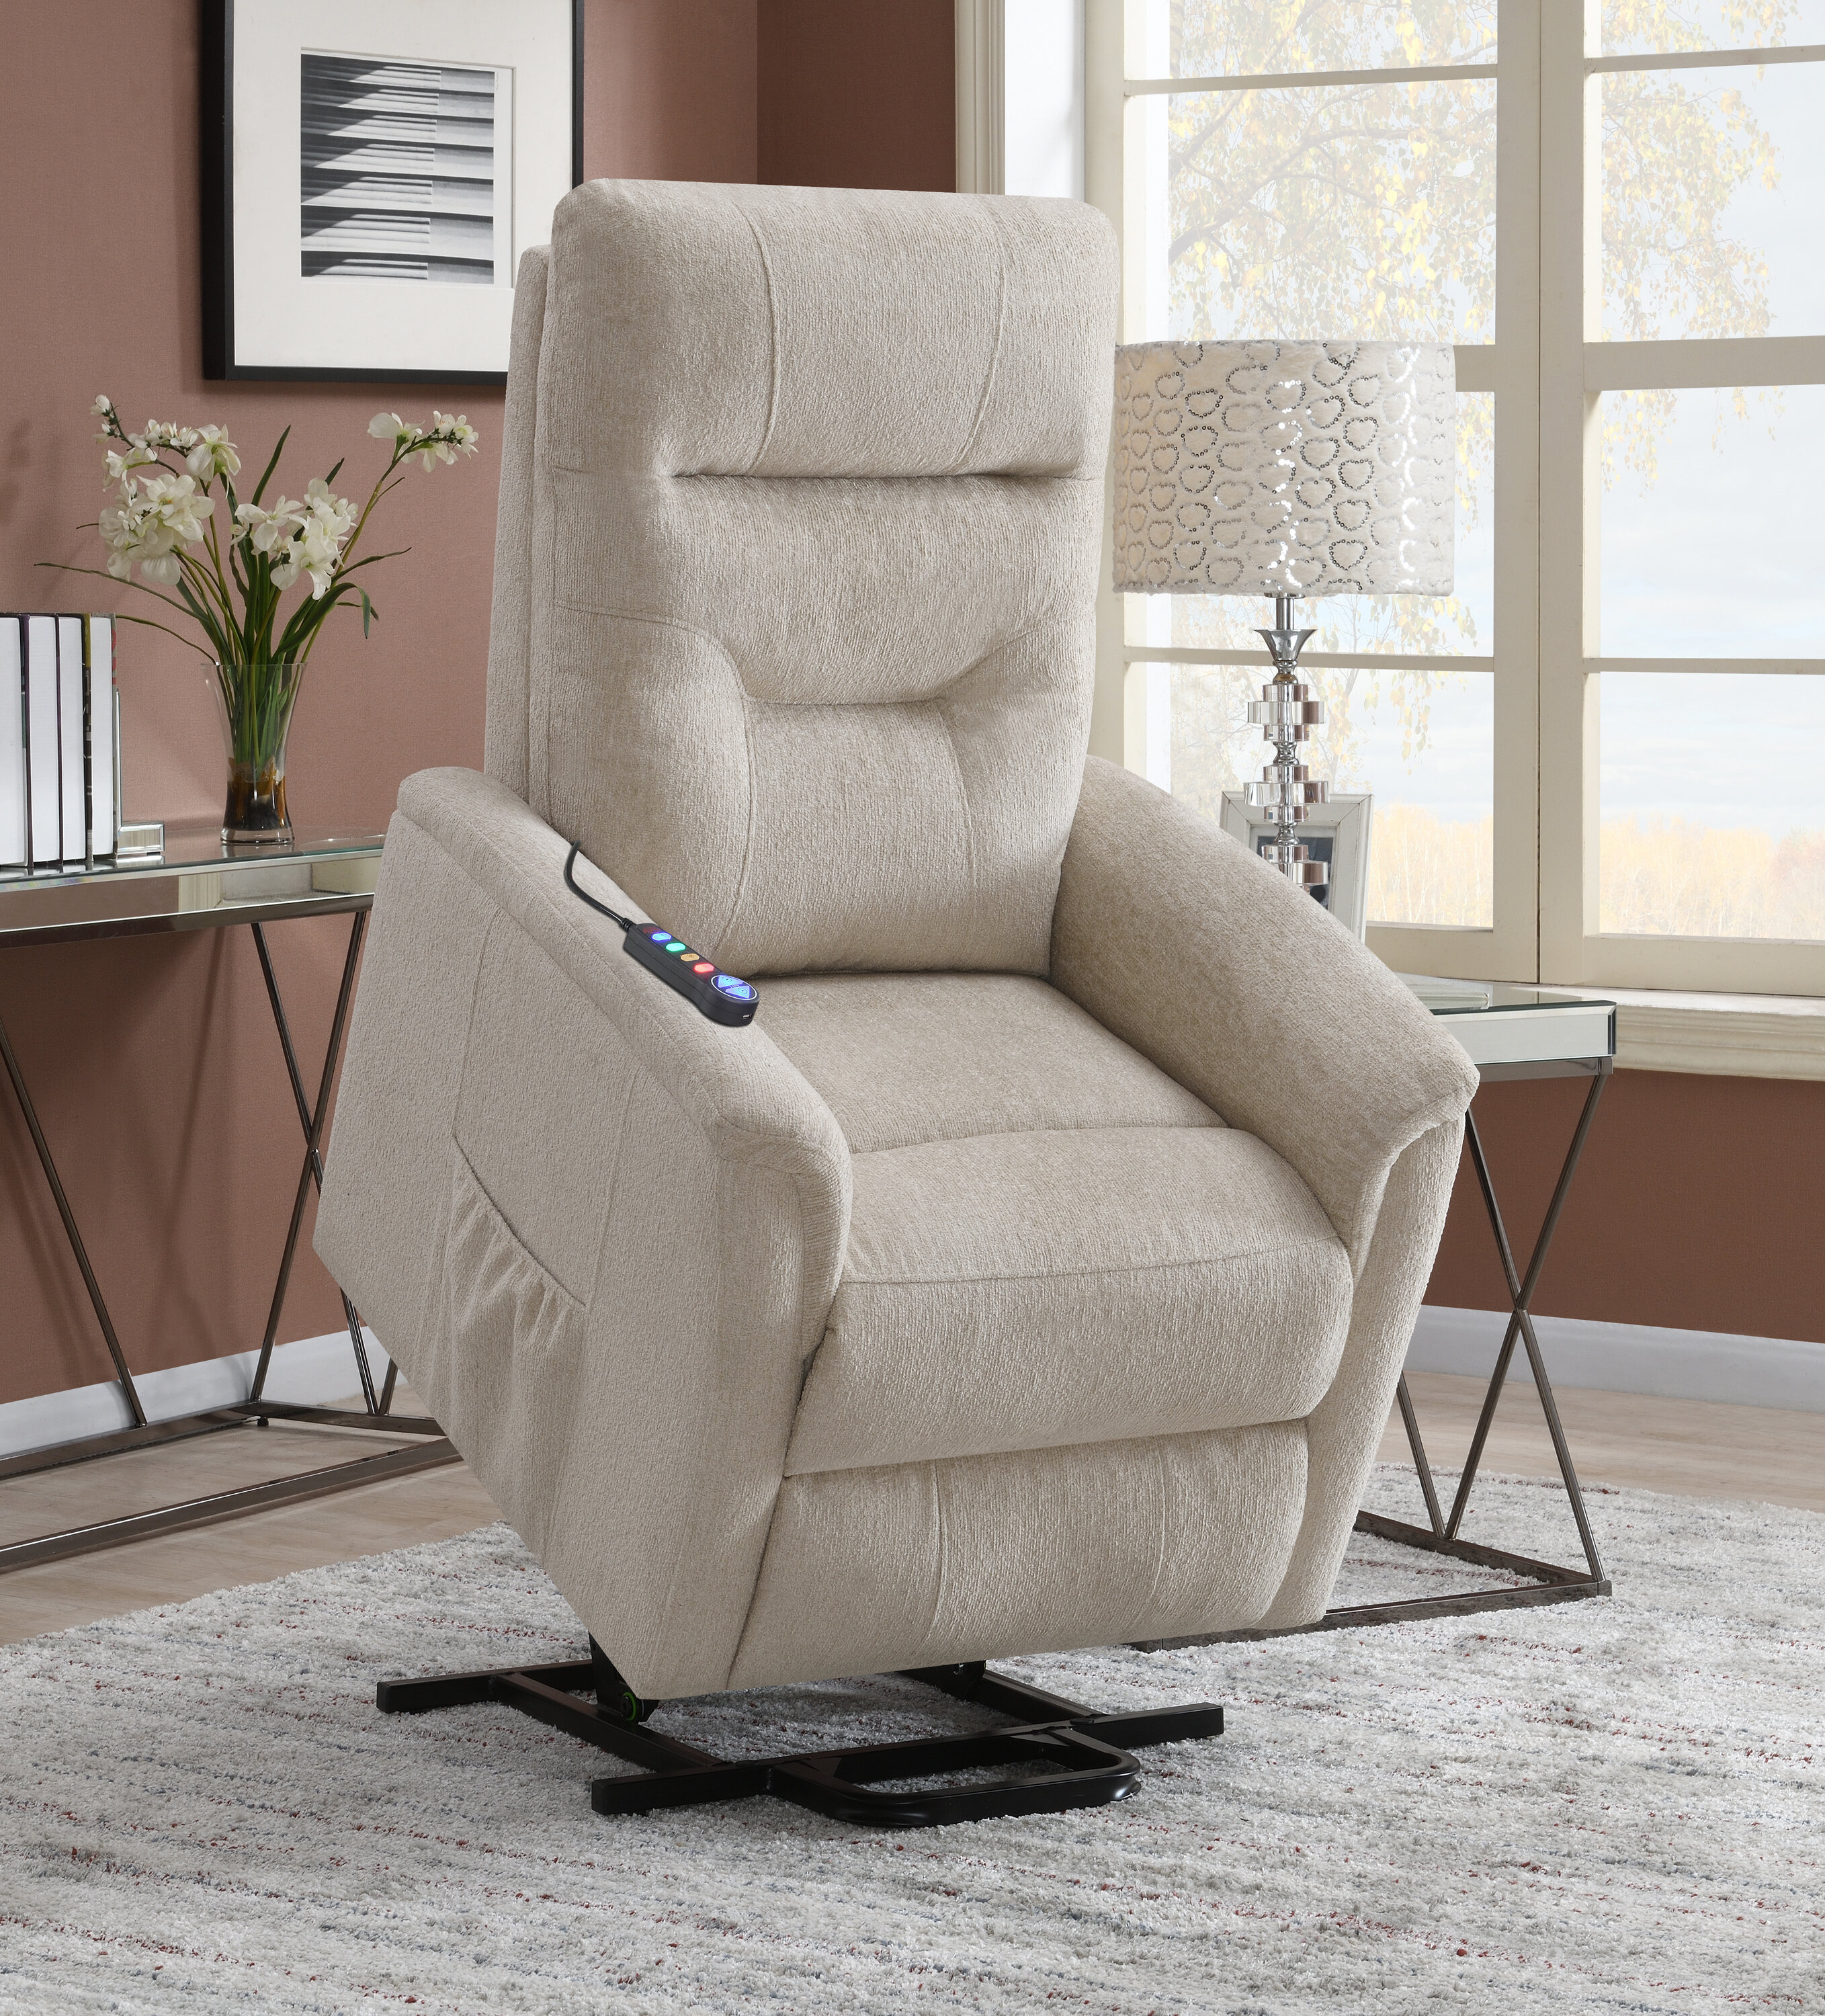 Great power recliners for elevated sleep - Reviewed